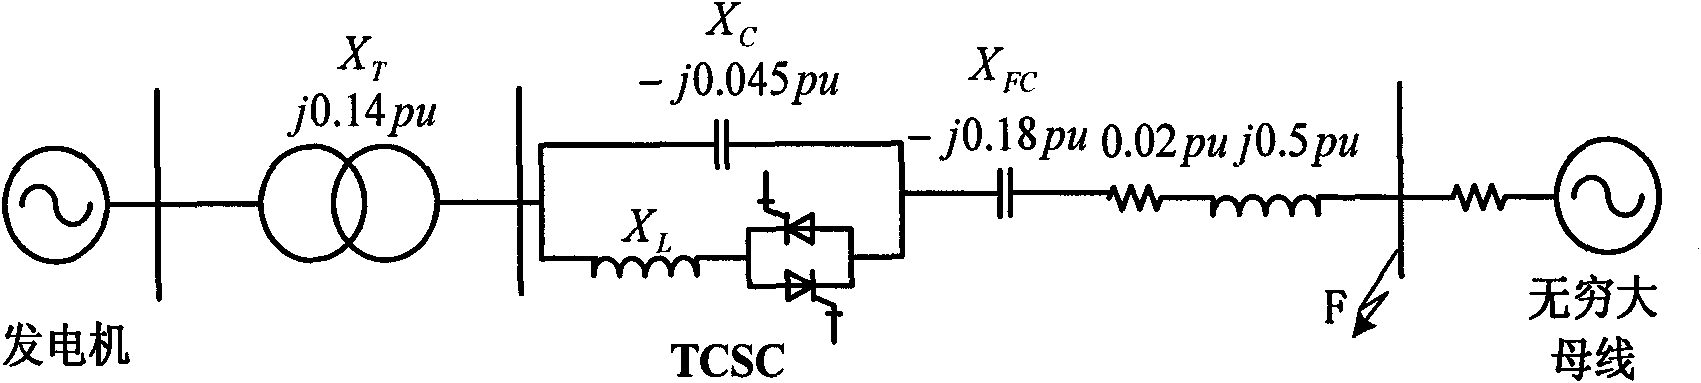 Sub-synchronous oscillation suppression method based on controlled series compensation